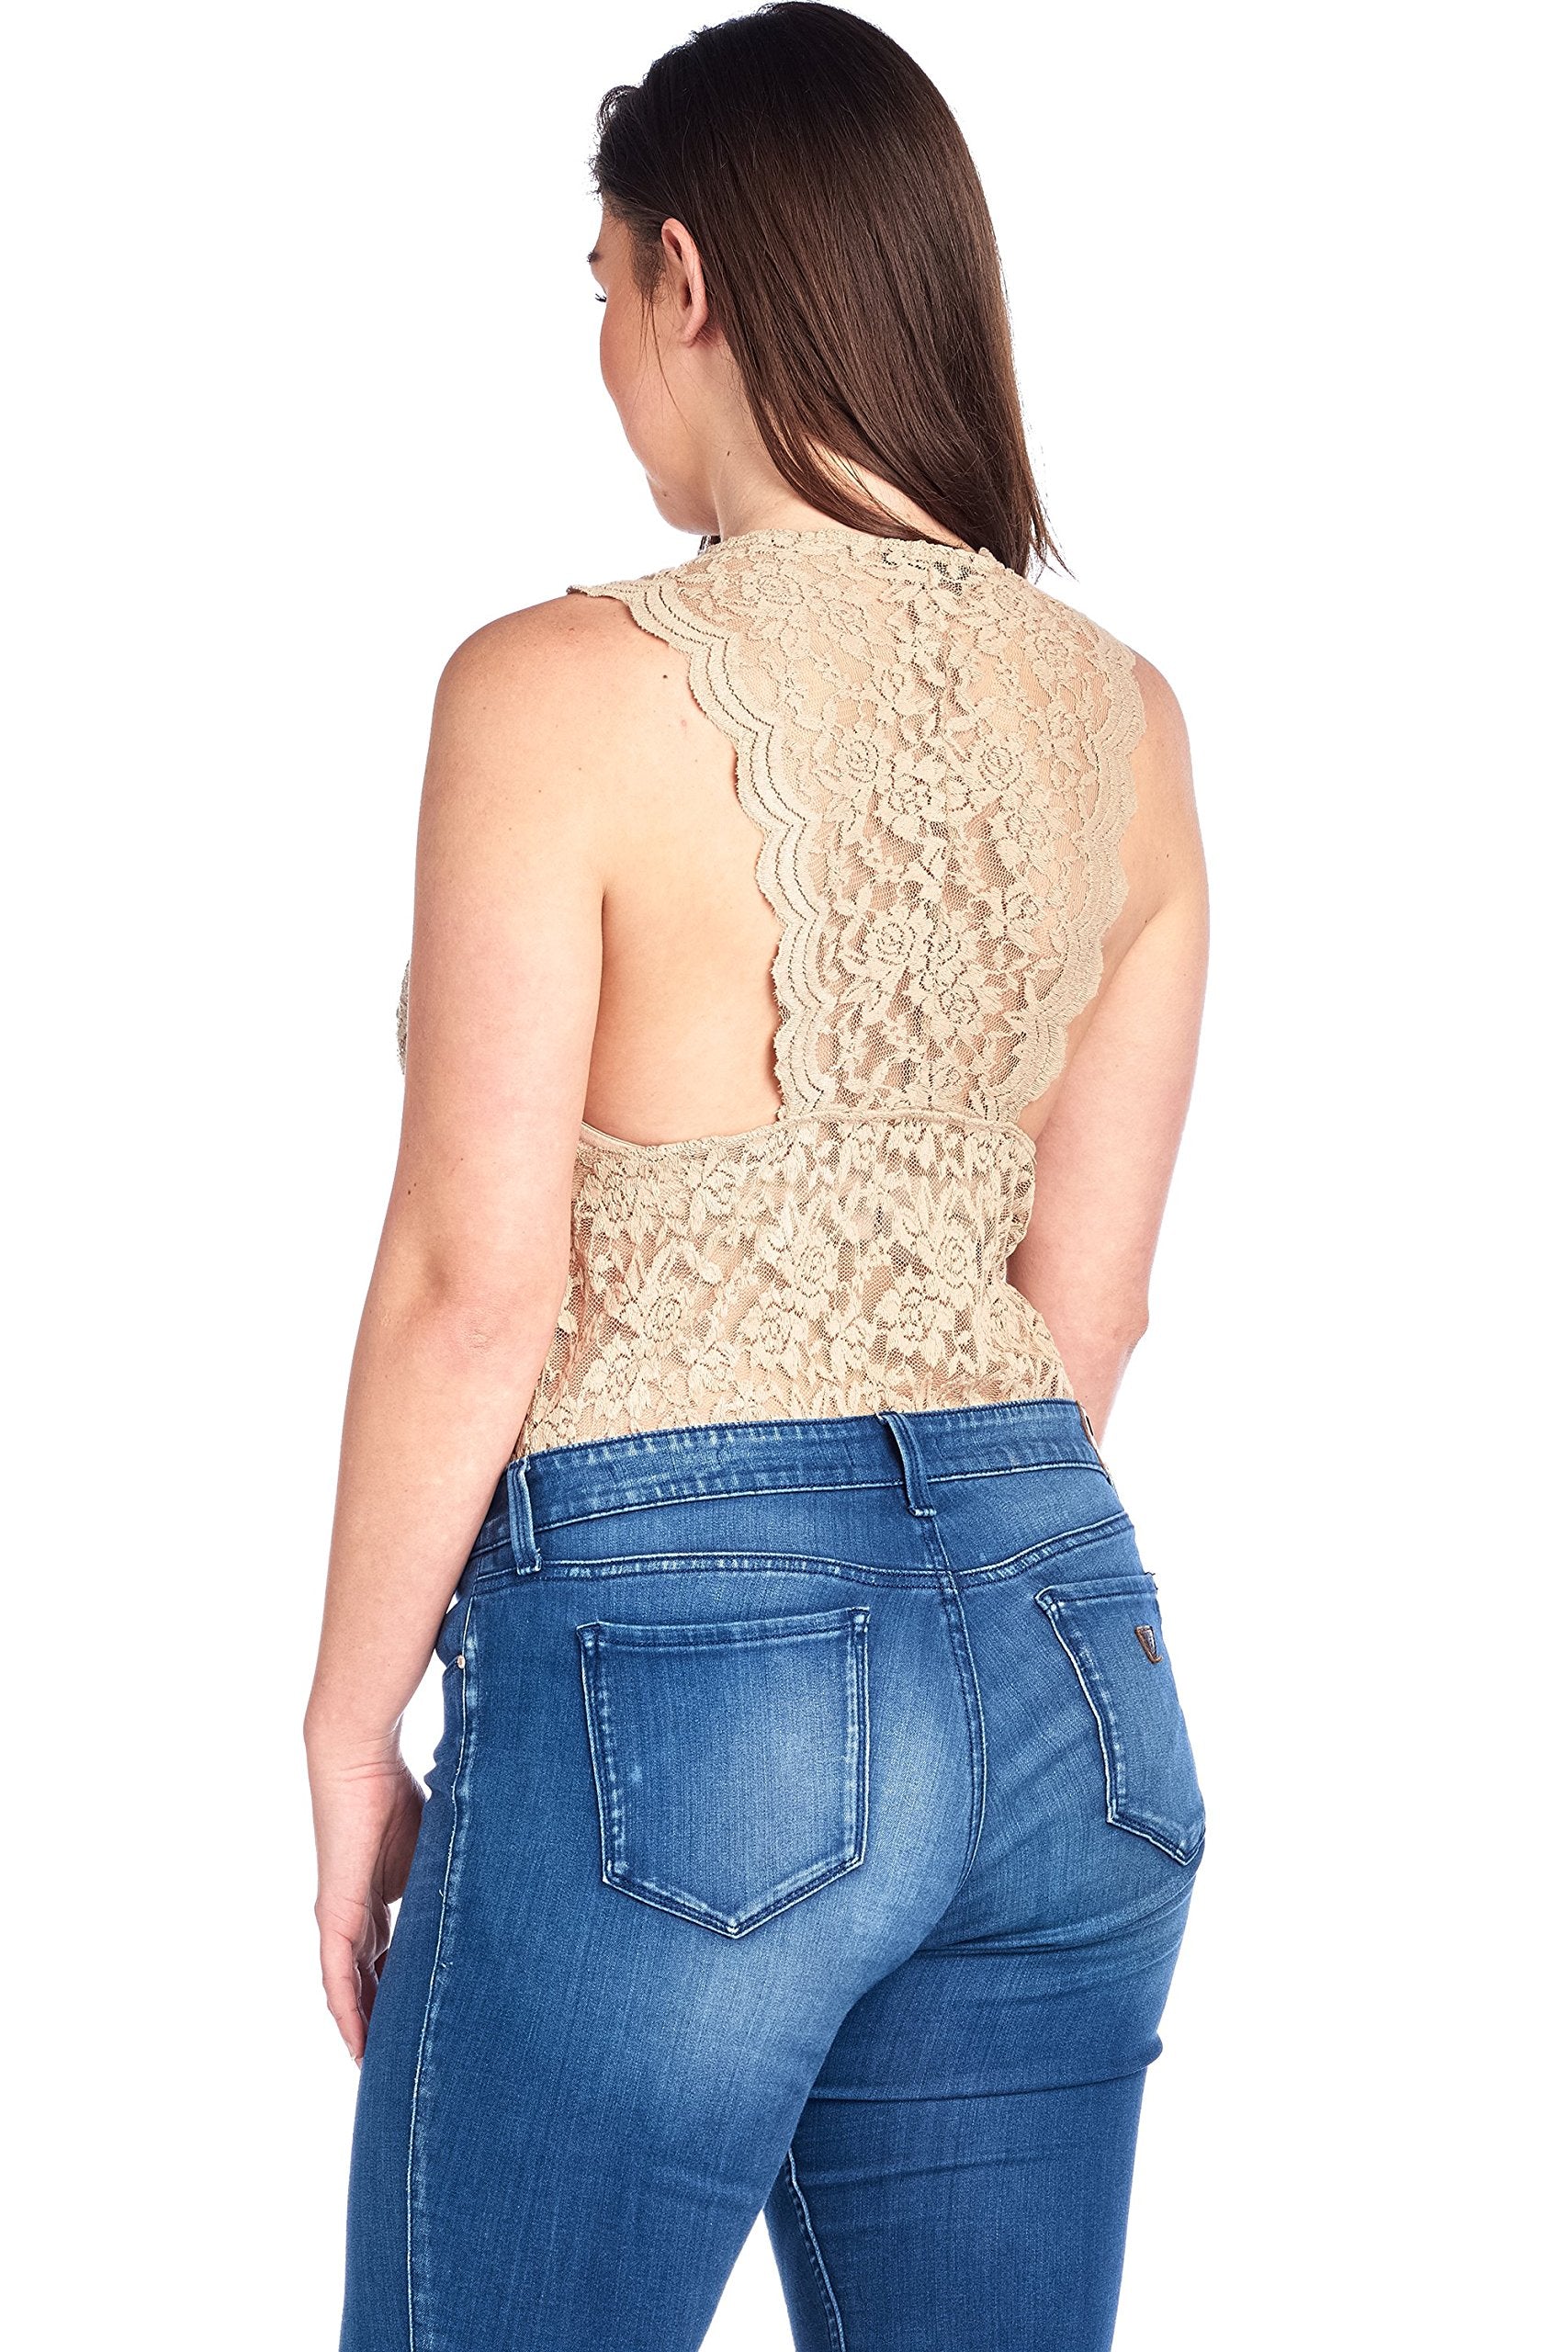 Women's Plus Size Sleeveless Racer Back Floral Lace Low V-Neck with Snap Buttons Bodysuit